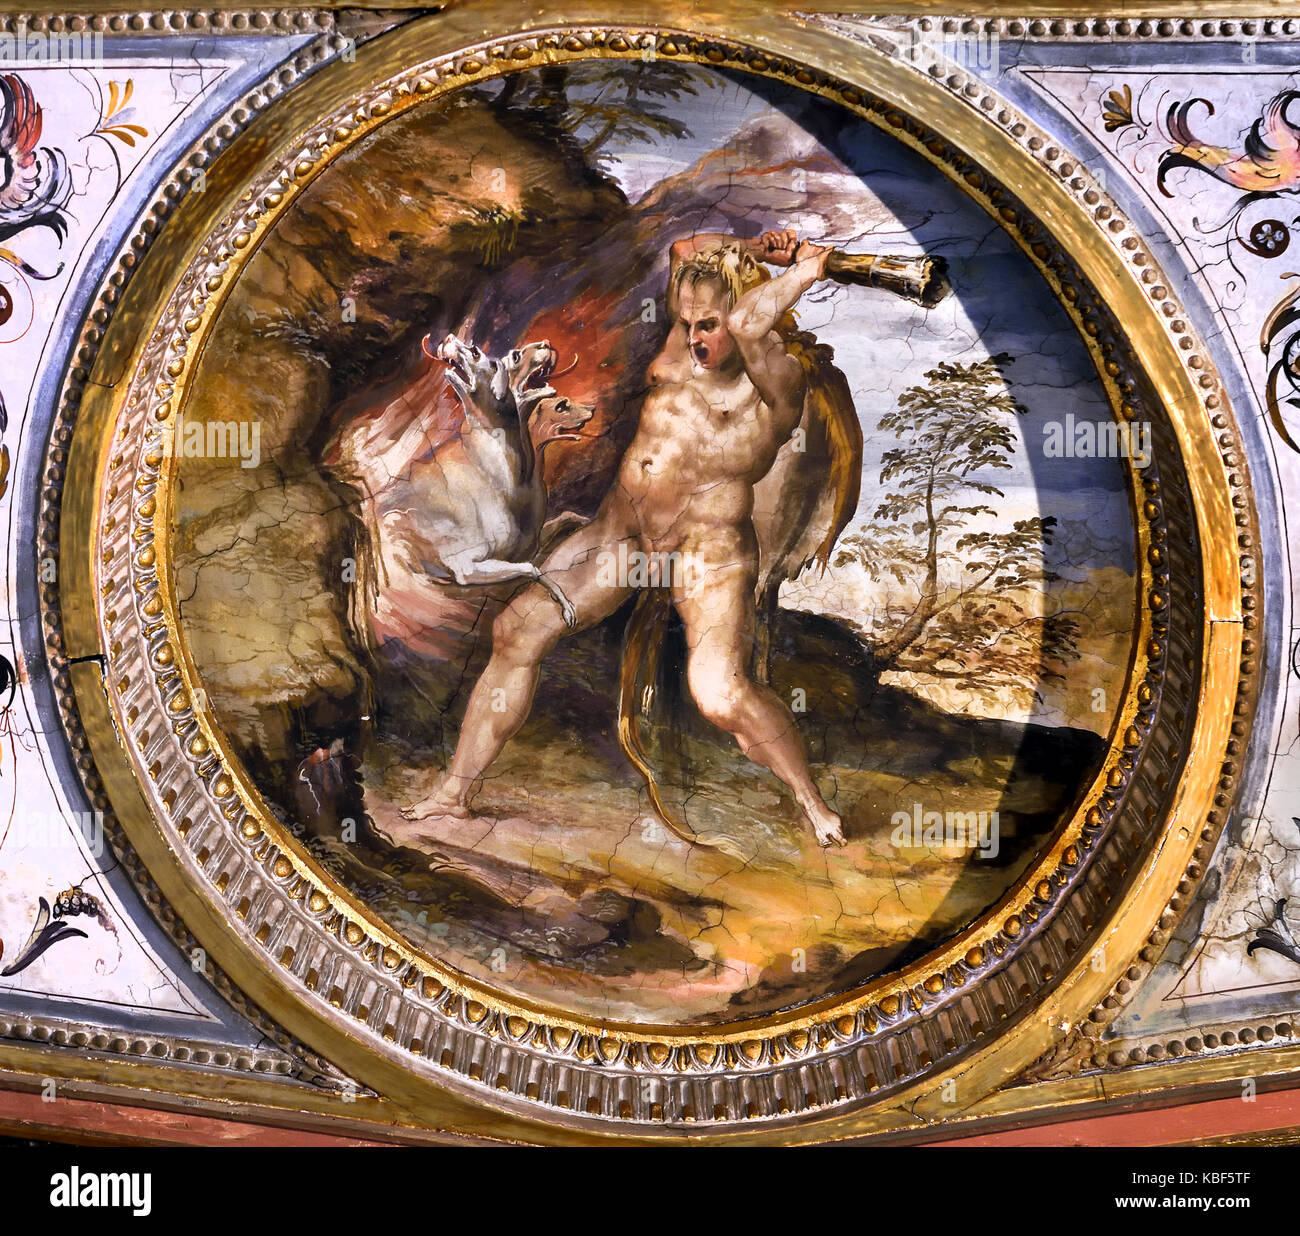 Ercole é Cerbero - Hercules is Cerberus by  Giorgio Vasari 1556-1557 The Hercules Room This room (the Sala di Ercole) gets its name from the subject of the paintings on the ceiling with stories of Hercules.The Palazzo Vecchio Florence Italy 16th Century Stock Photo